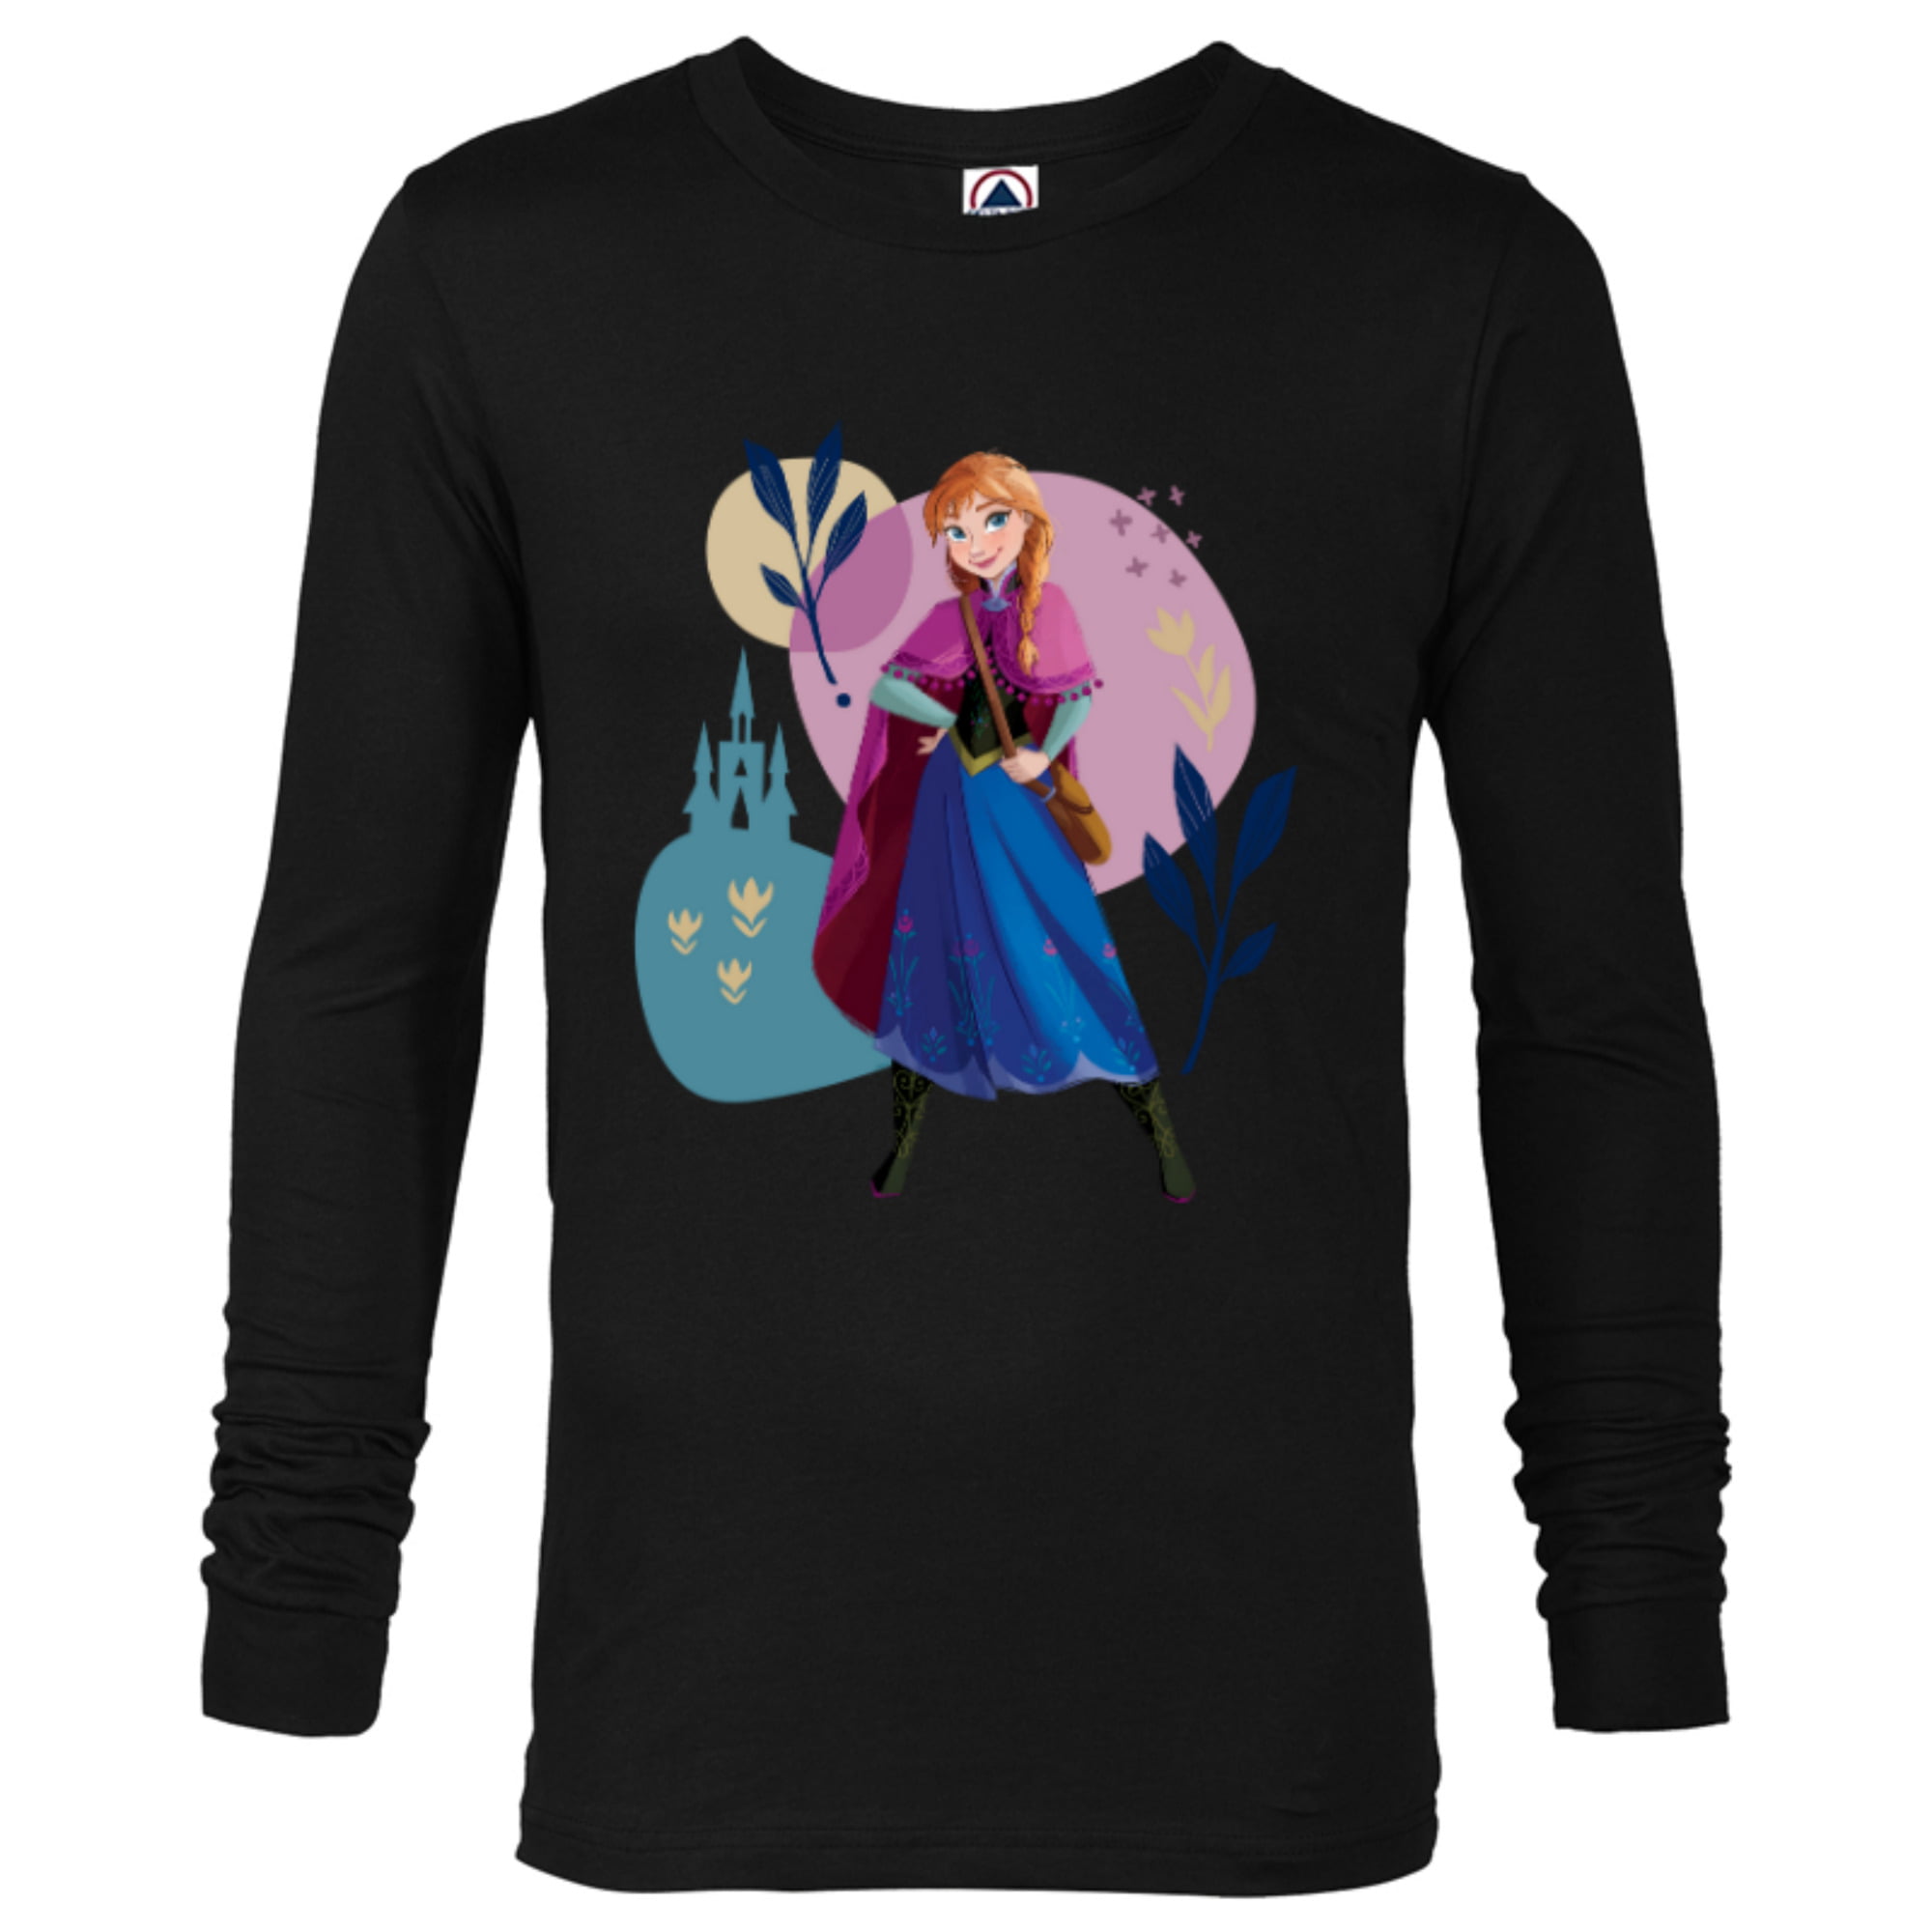 Disney Frozen Princess Anna of Arendelle - Long Sleeve T-Shirt for Men -  Customized-Athletic Heather